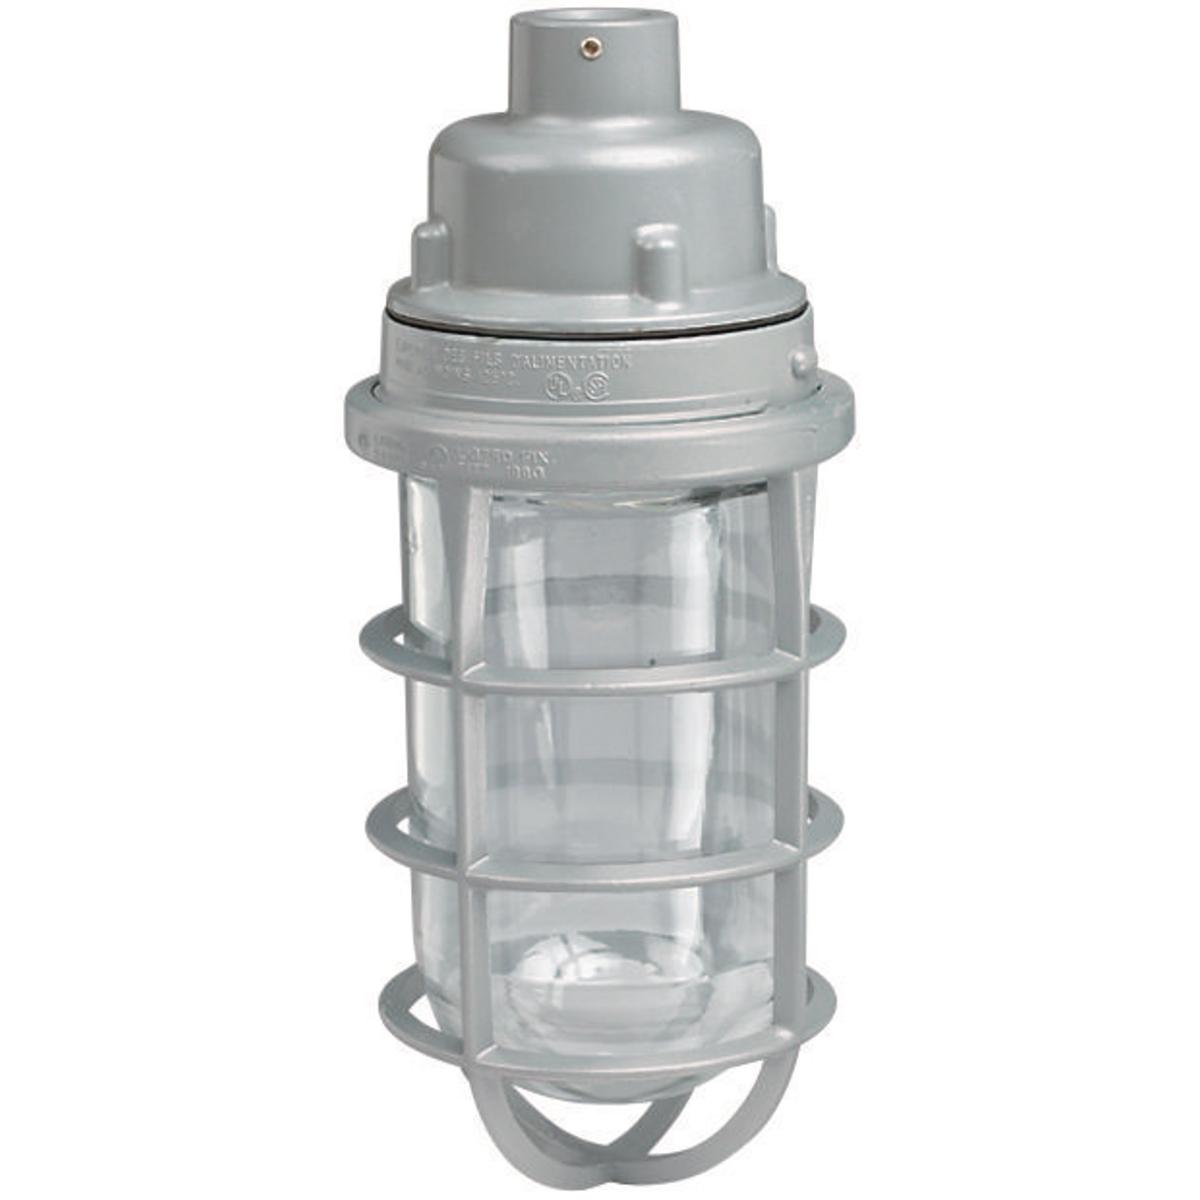 Hubbell VUAGG-2-200 200W V Series Incandescent - Pendant - 3/4" Hub With Globe and Guard  ; Electrostatically applied epoxy/polyester finish ; Modular design ; Hubs are threaded for attachment to conduit ; Set screws in pendant fixture ; Copper-free aluminum (less than .004%